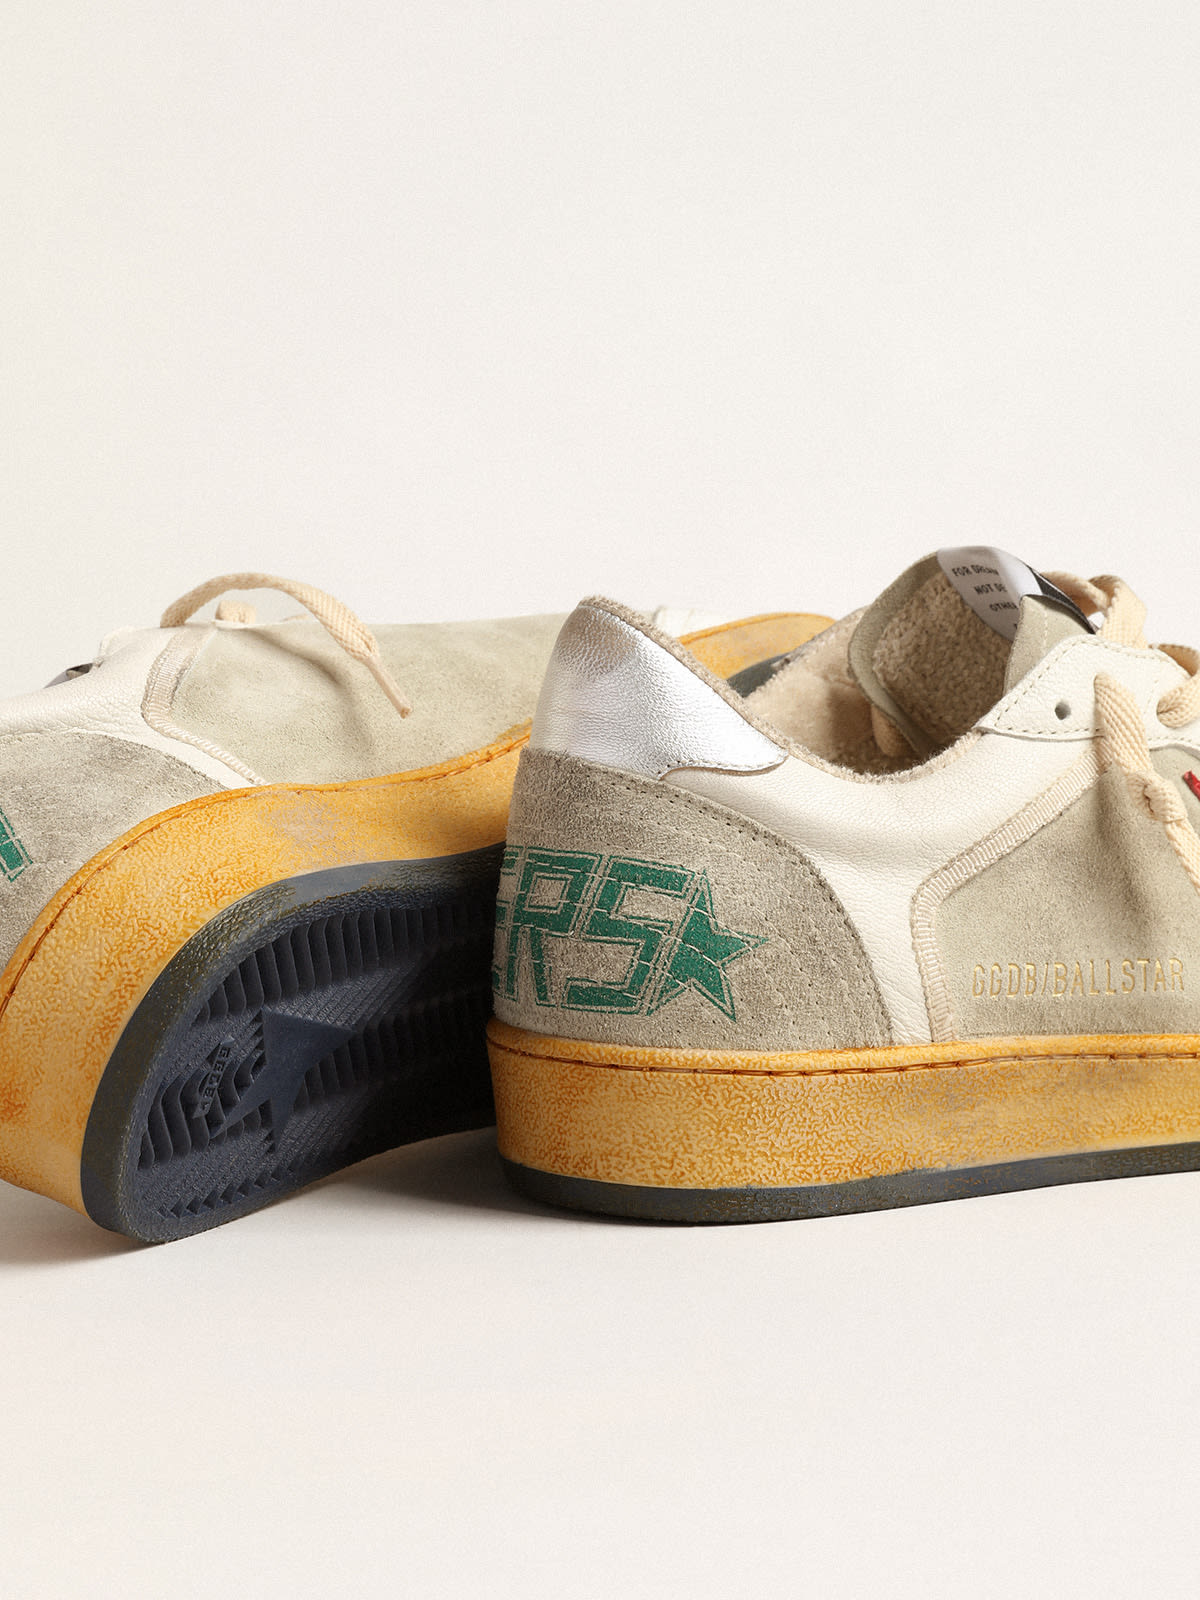 Golden Goose - Ball Star in gray suede with red star and silver heel tab in 